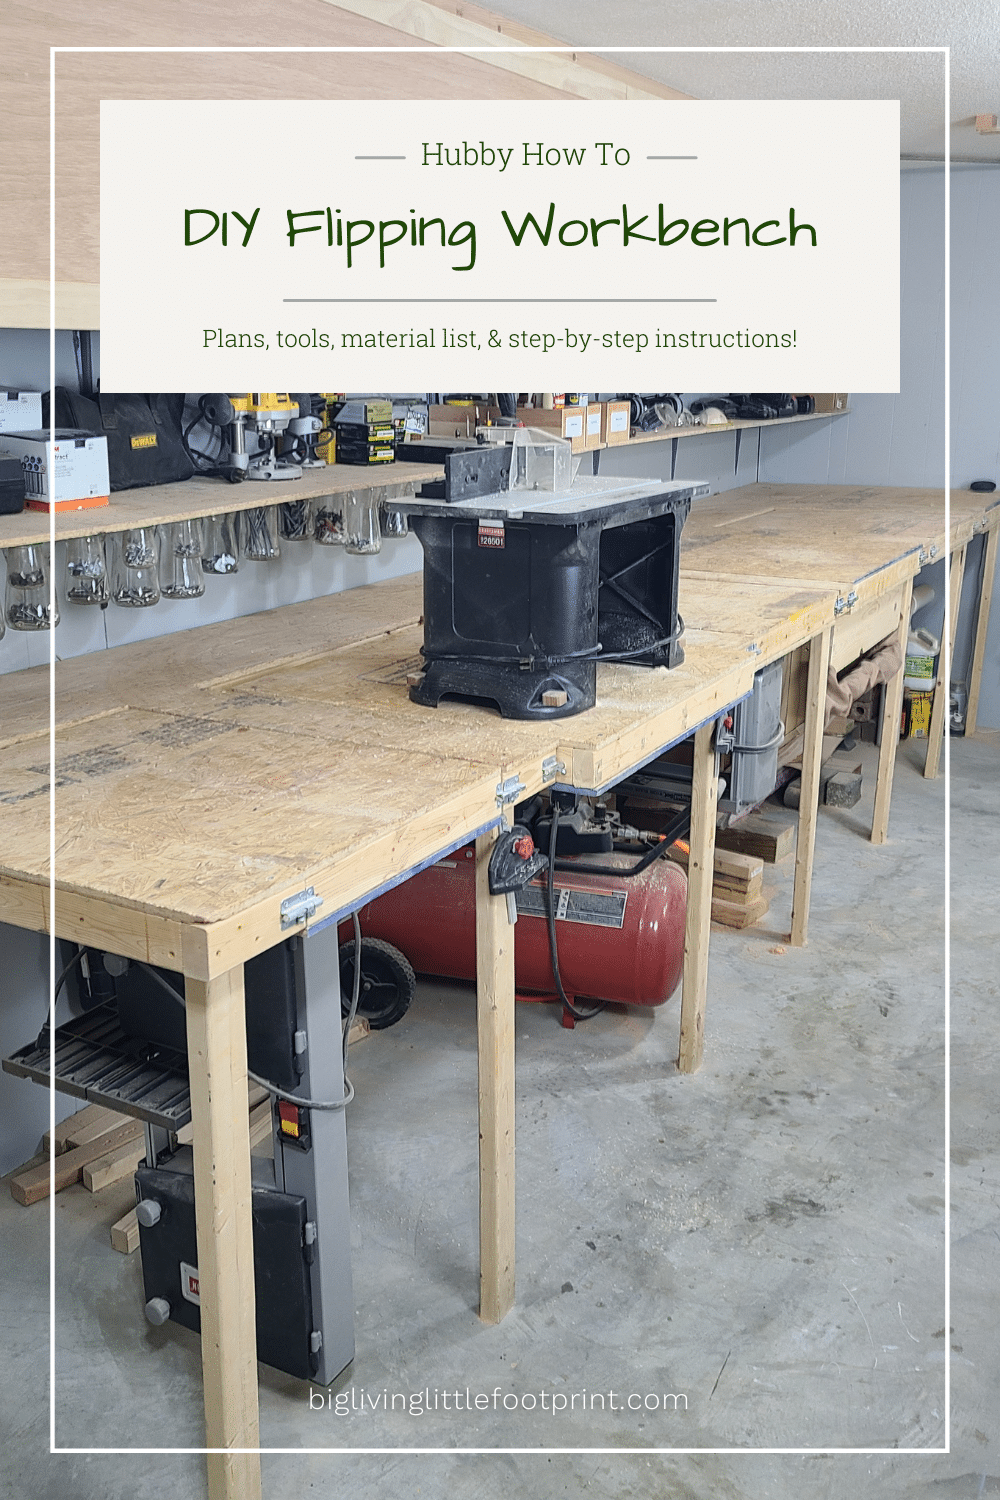 Hubby How To: DIY Flipping Workbench